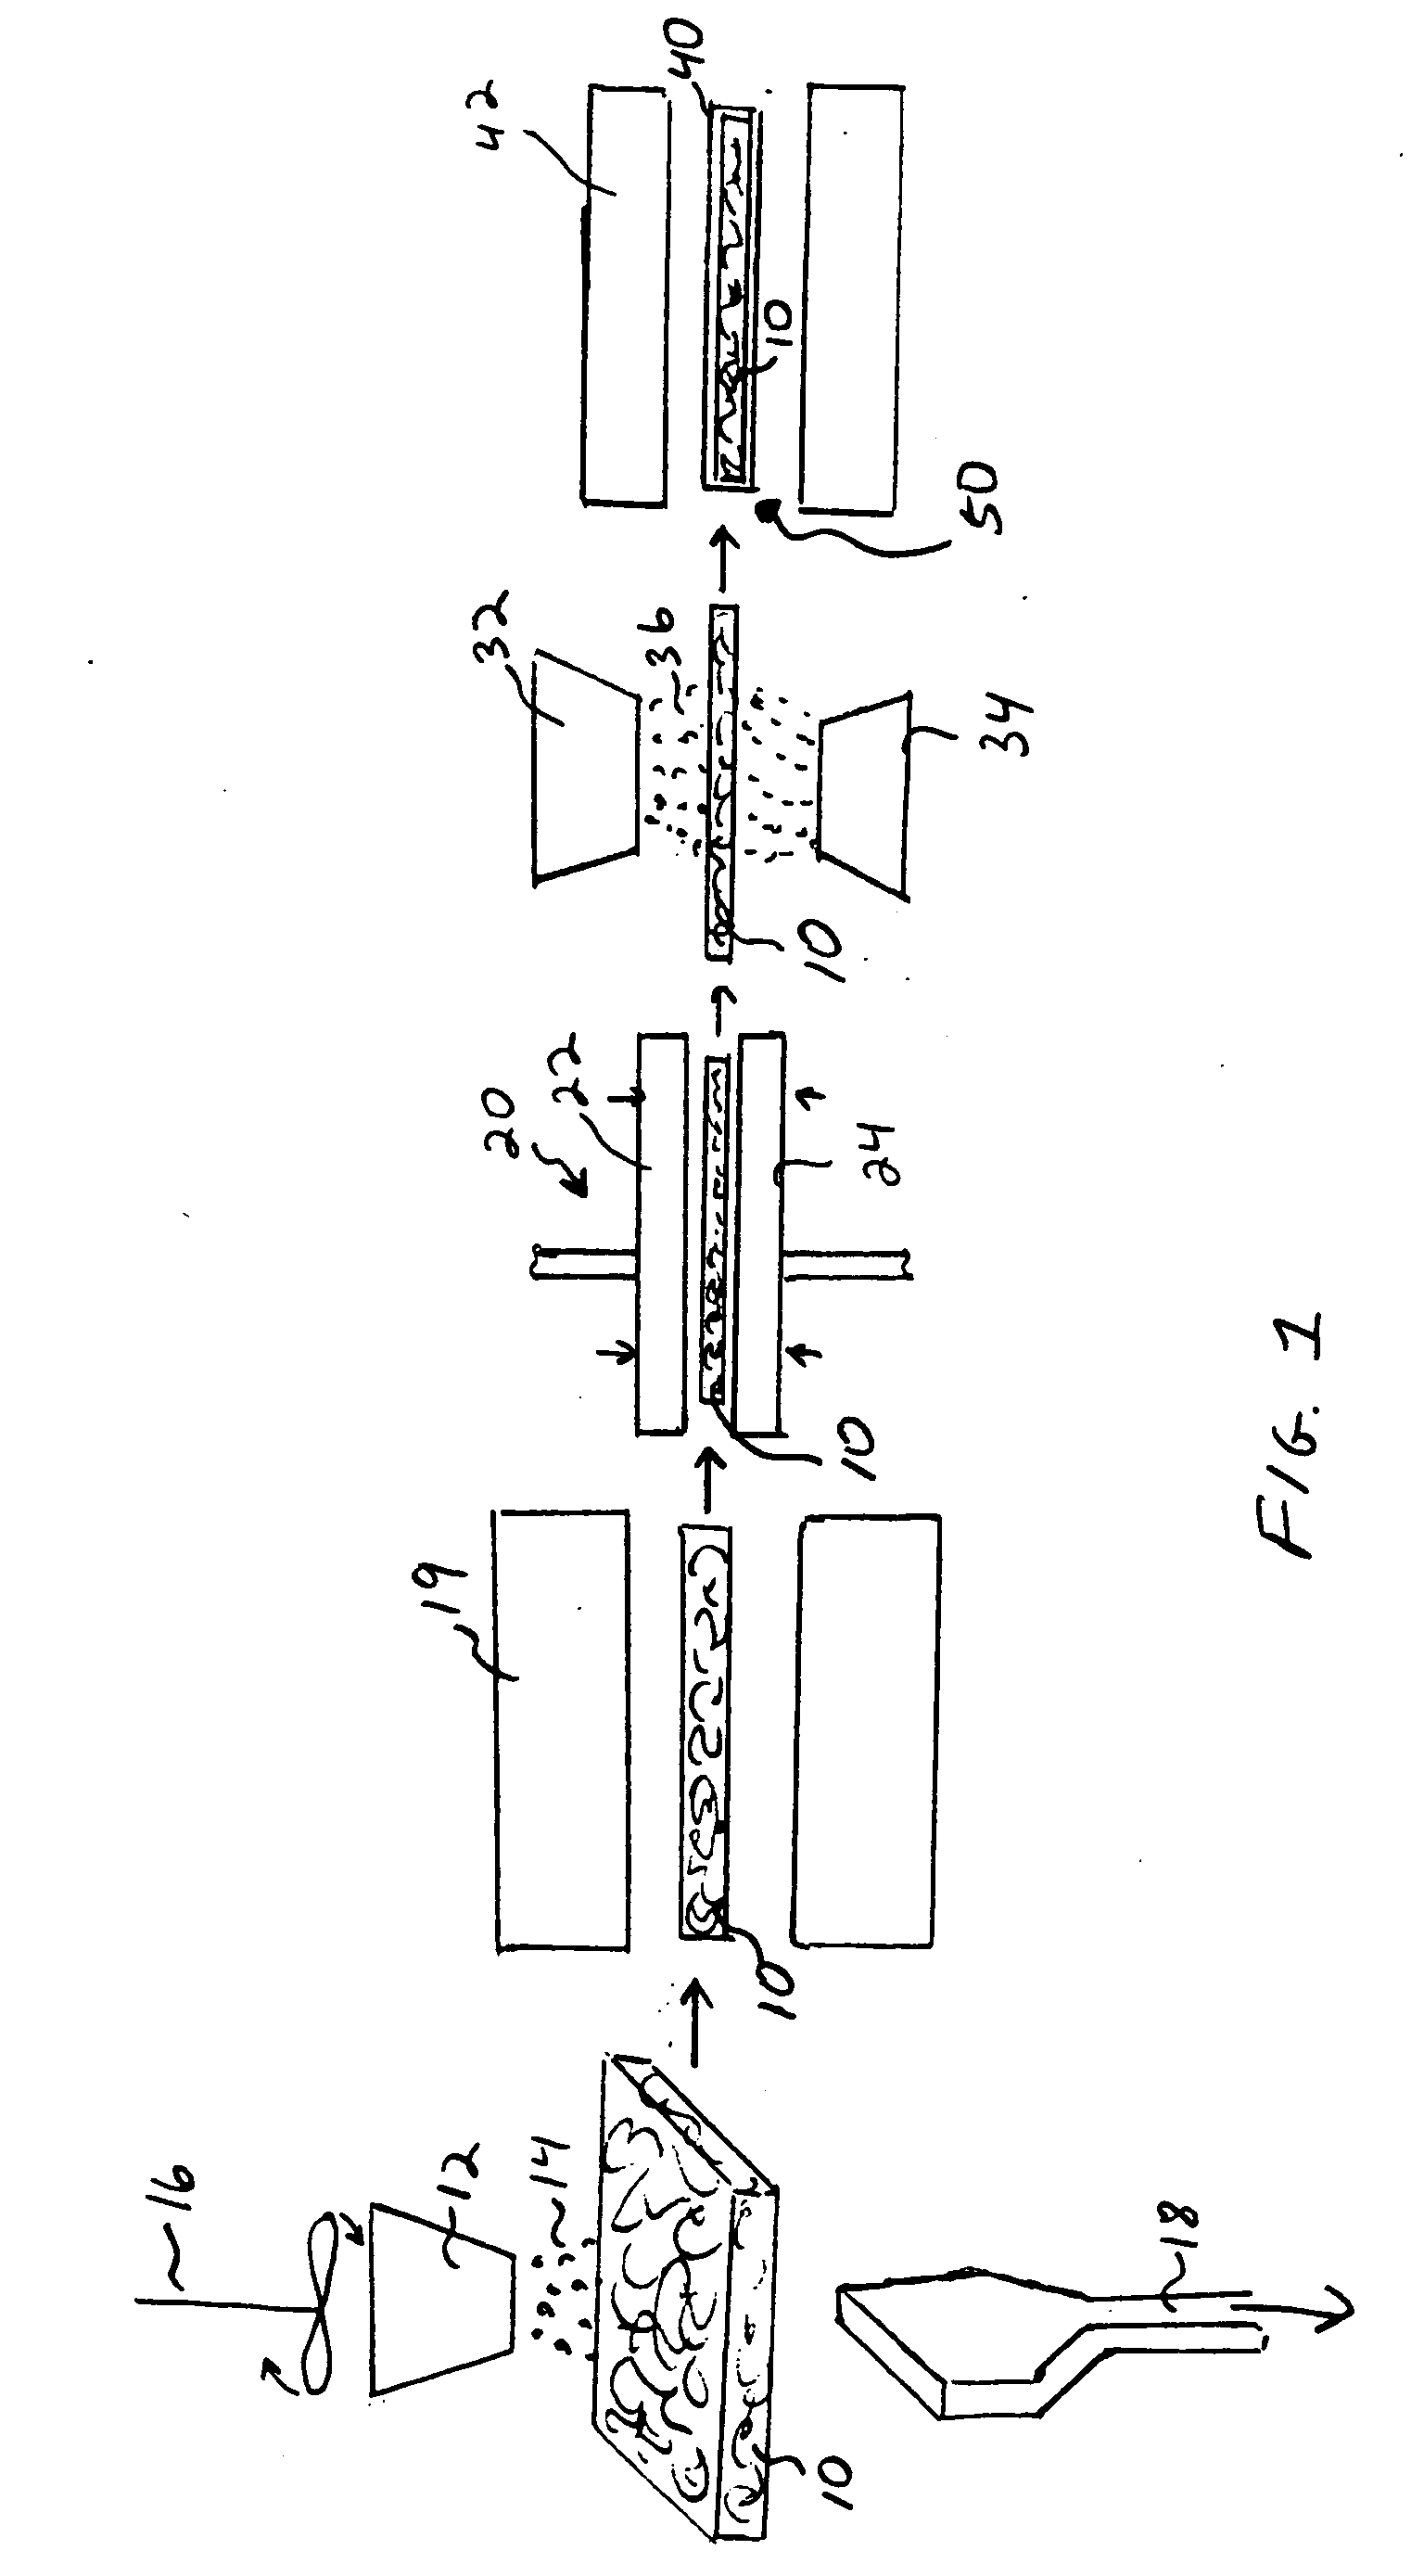 Fire-resistant fiber-containing article and method of manufacture